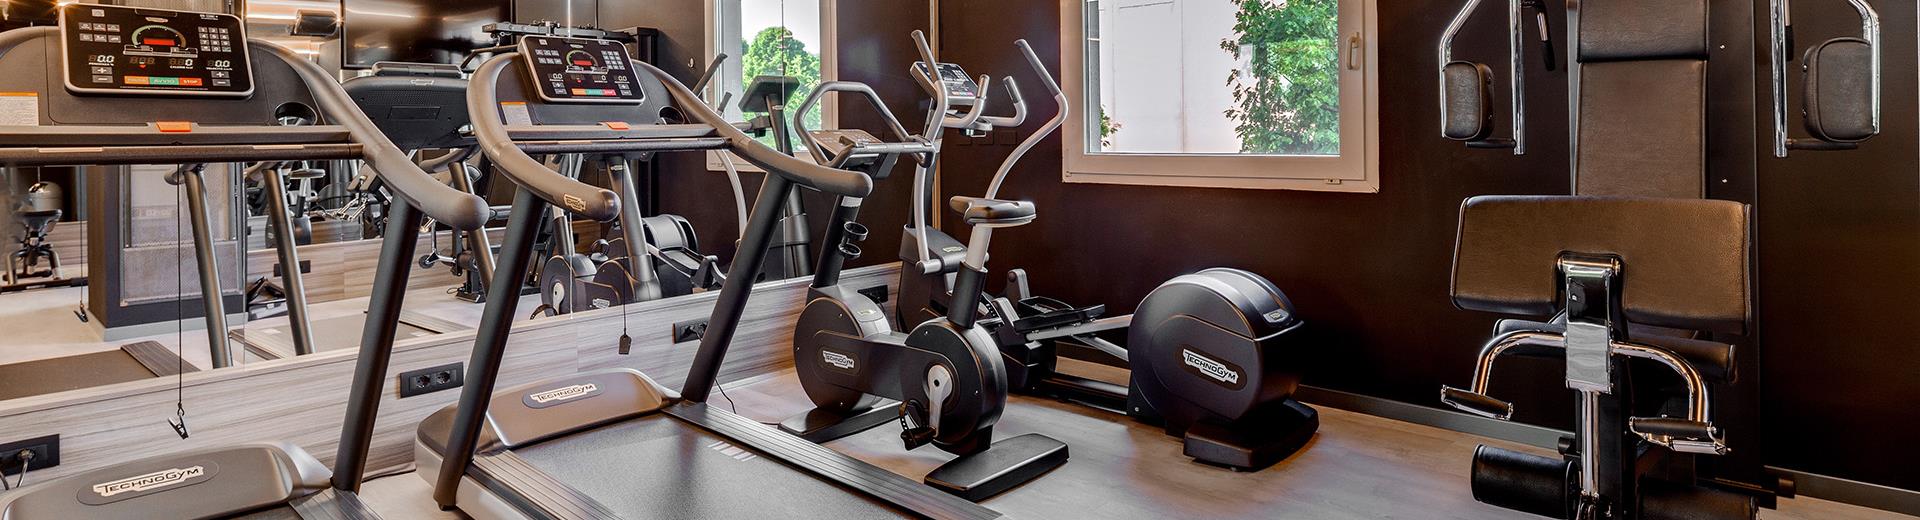 Keep fit in the gym at Best Western Hotel Aries